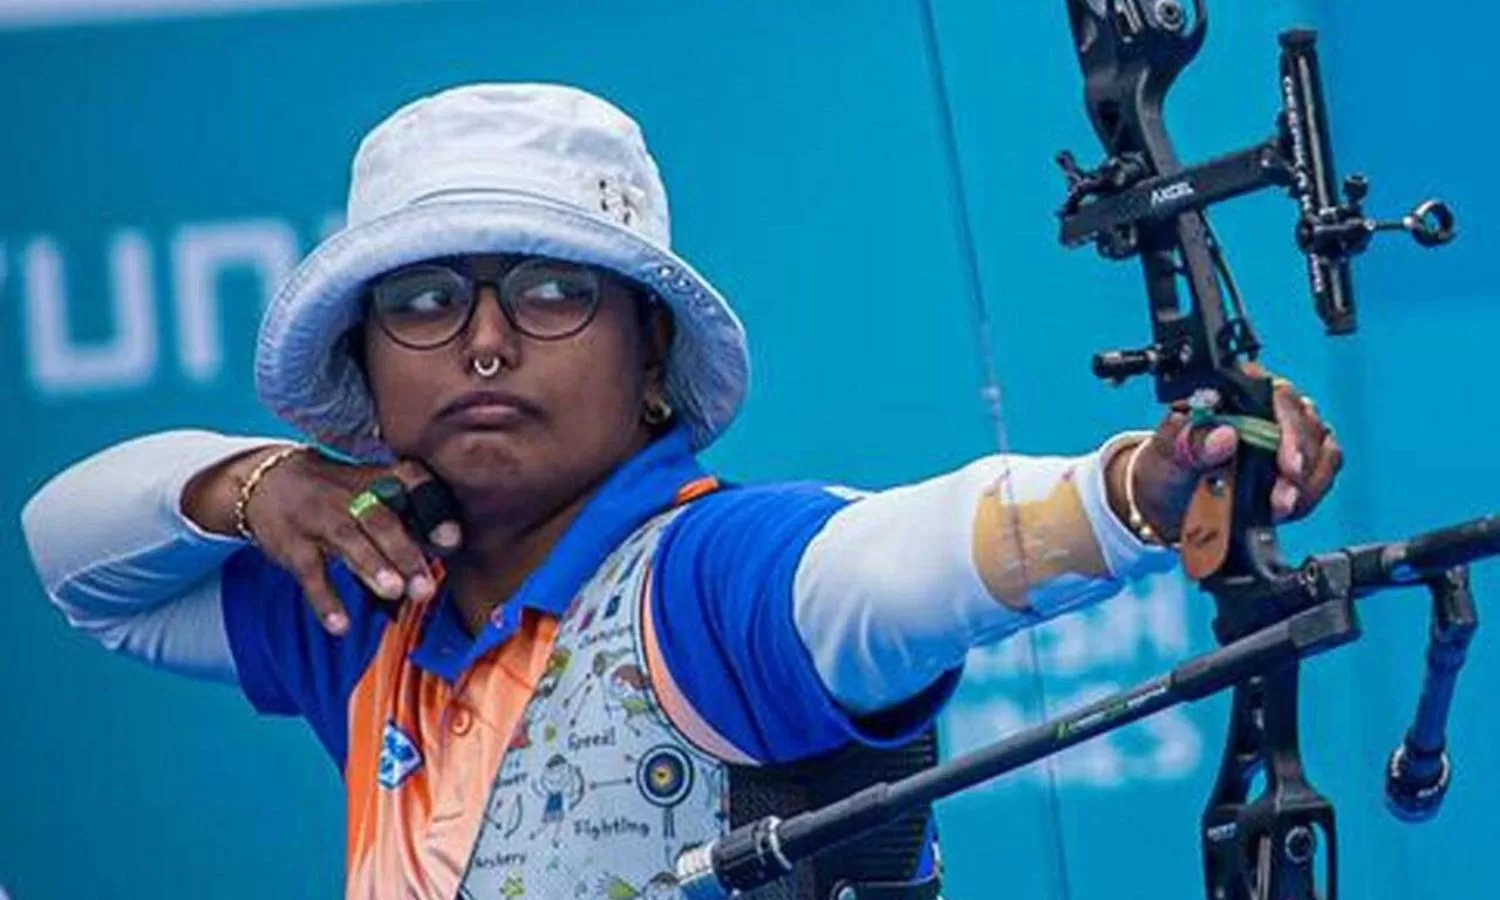 Deepika Kumari secures top spot in Archery selection trials, aims for World Cup and Paris Olympics